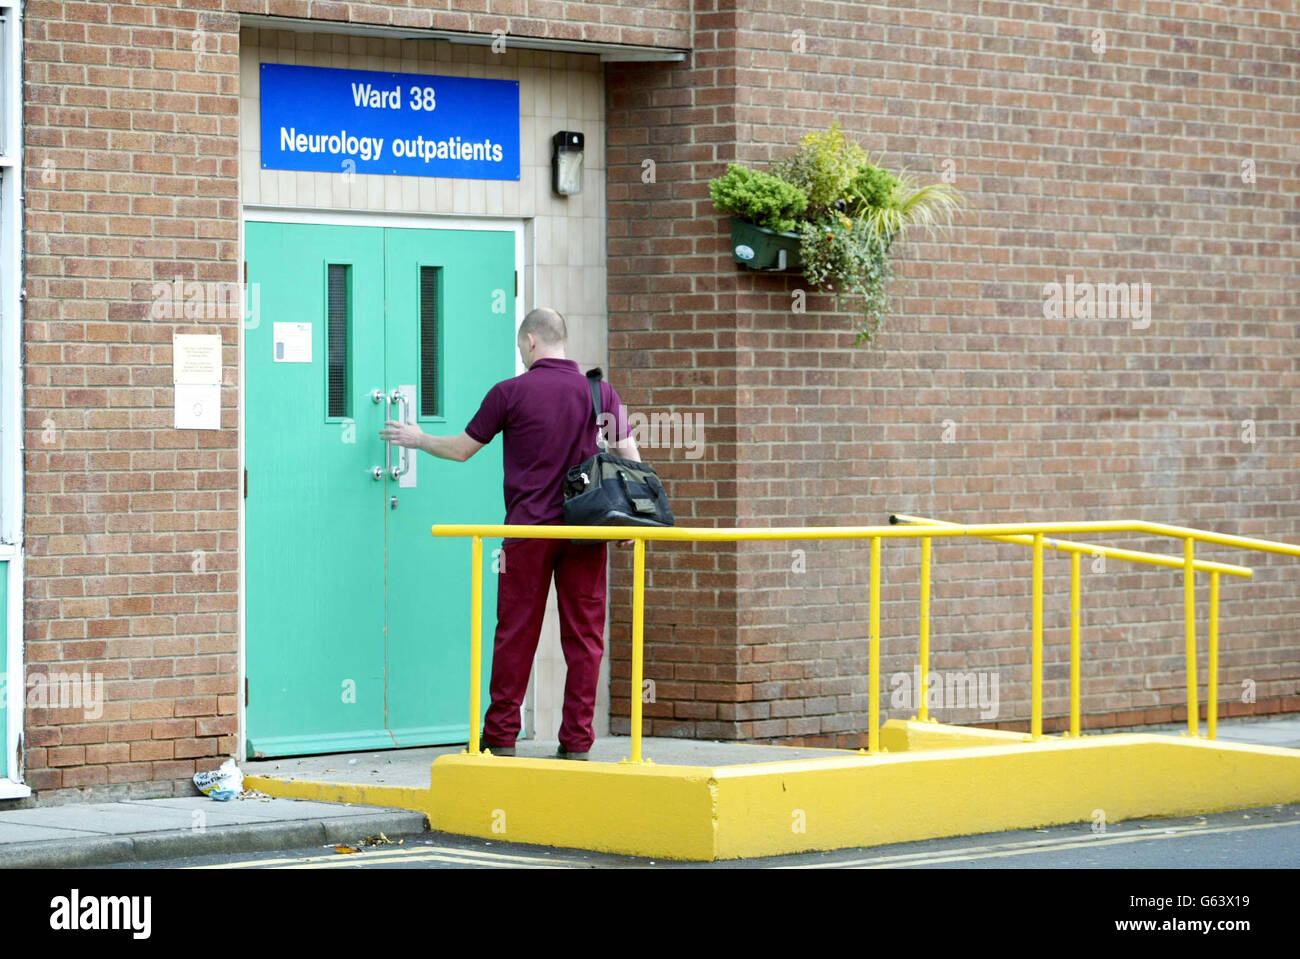 A man enters the Neurology outpatients ward at Middesbrough General Hospital, Middesbrough. The hospital at the centre of a sporadic CJD scare after instruments exposed to the disease during brain surgery were then used on another 24 patients. * ... has insisted it was following the correct procedures. Health chiefs at Middlesborough General Hospital have come under fire after the Department of Health claimed that the instruments should have been quarantined as soon as it became clear there was a potential risk of transmitting CJD. Instead the instruments continued to be used during surgery Stock Photo